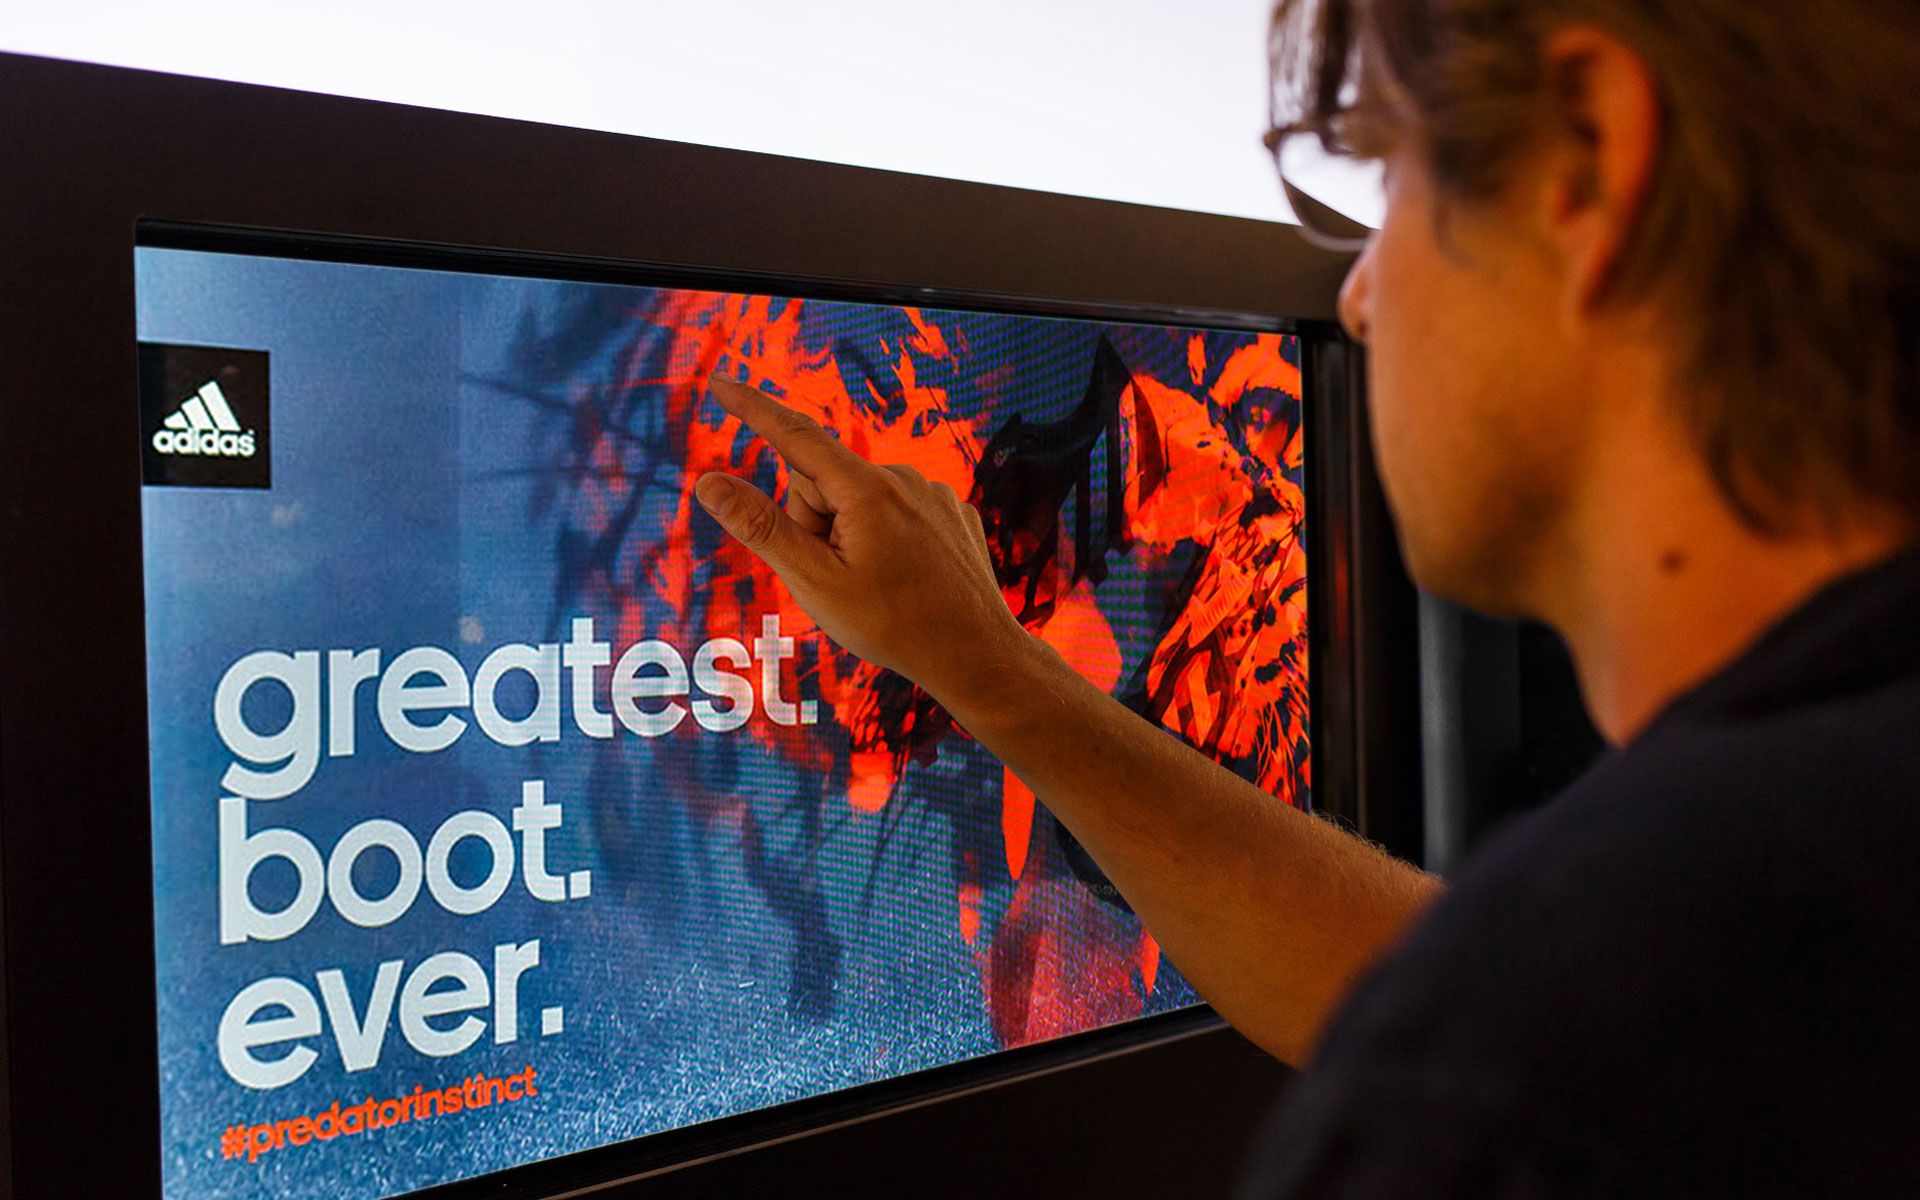 Person touching a touch screen that reads “Greatest. Boot. Ever.”